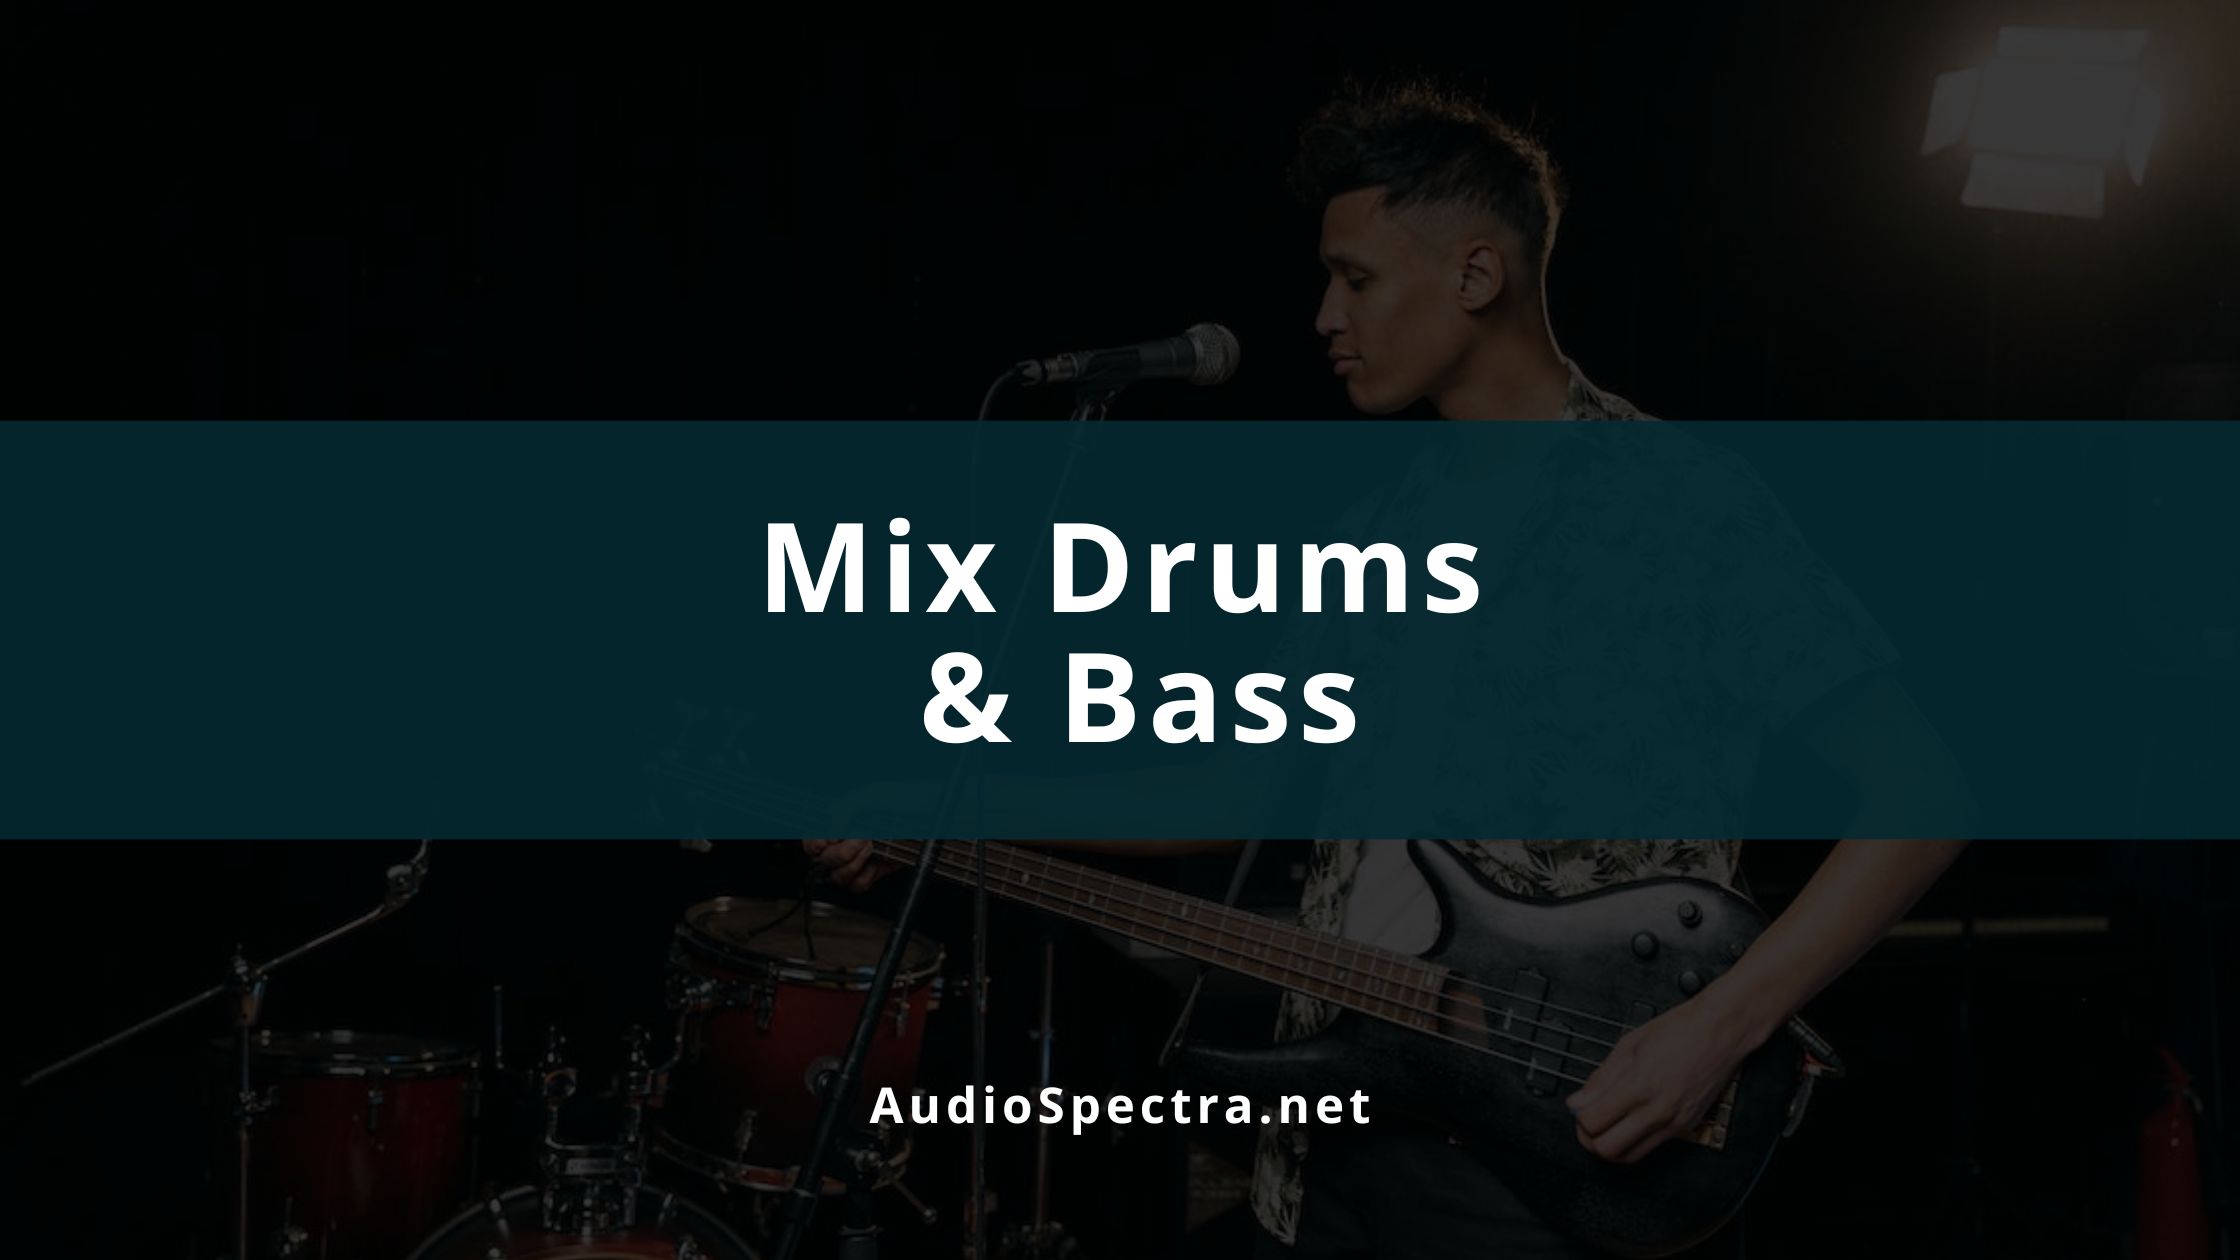 Mixing Drums and Bass